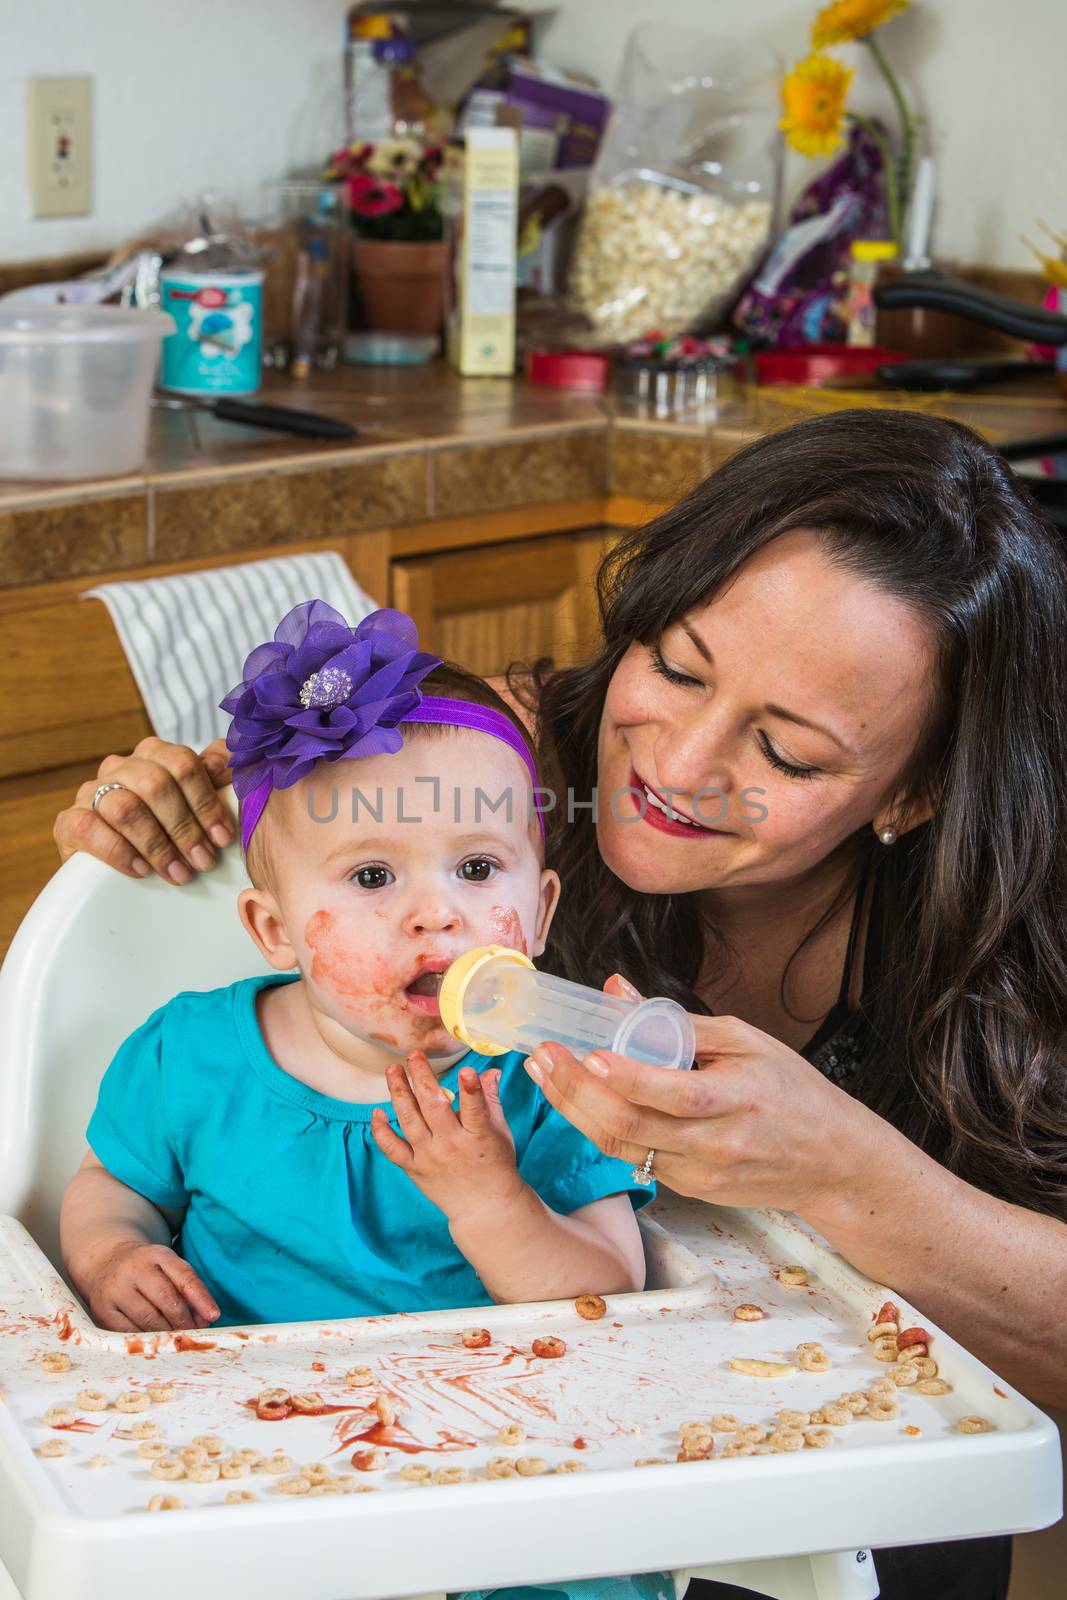 A woman in the kitchen feeds her baby from bottle